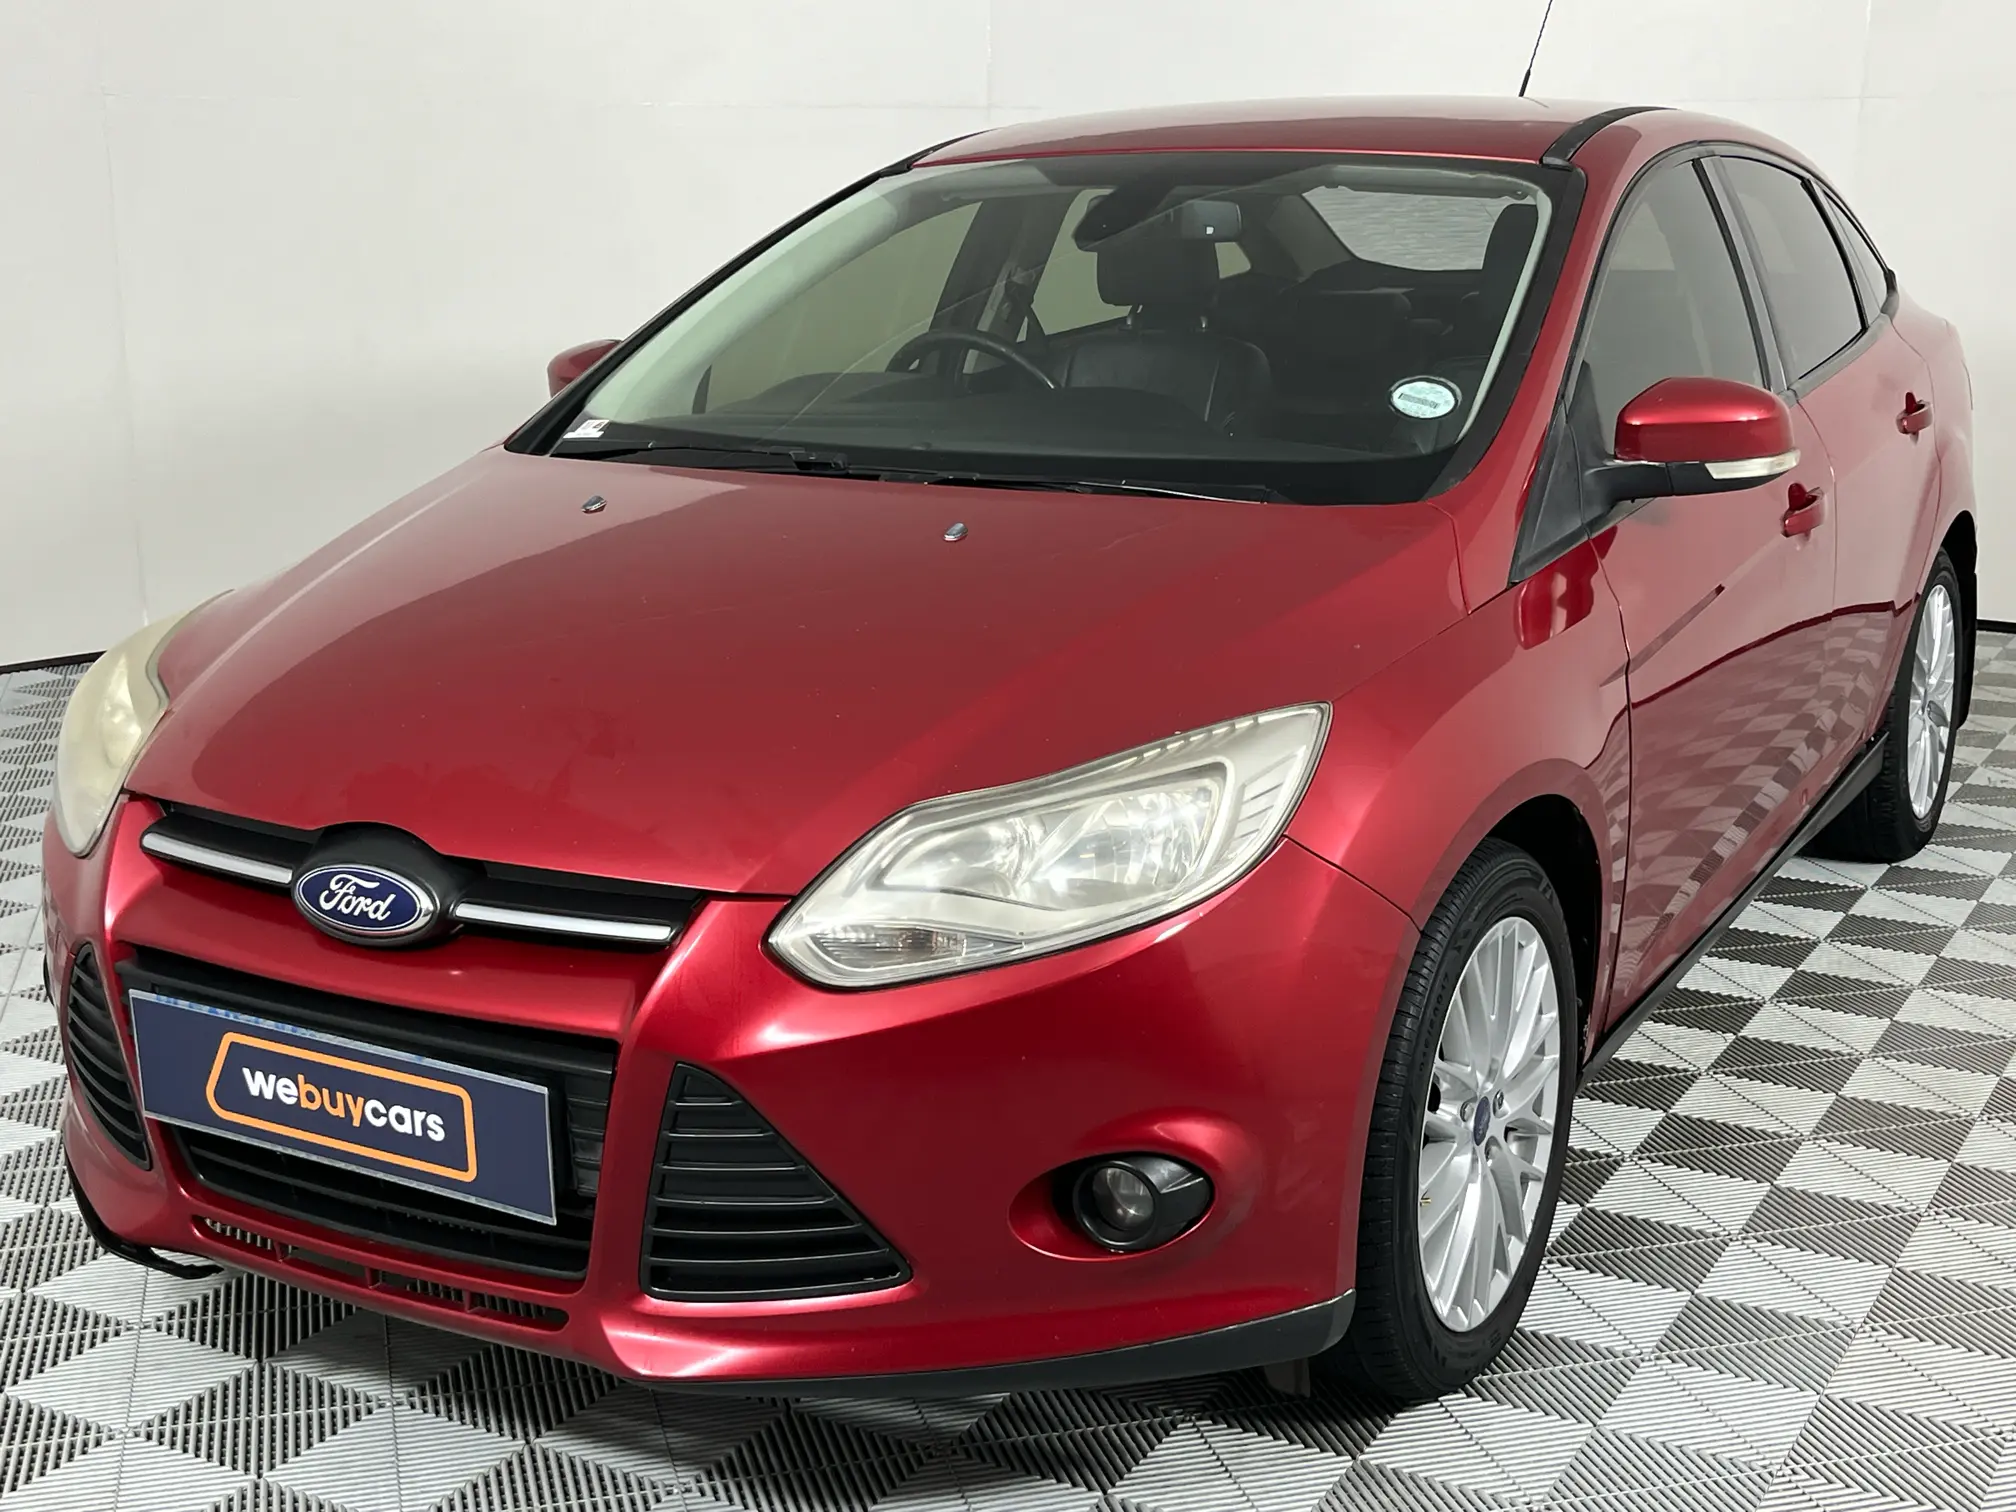 2012 Ford Focus 2.0 GDI Trend Powershift